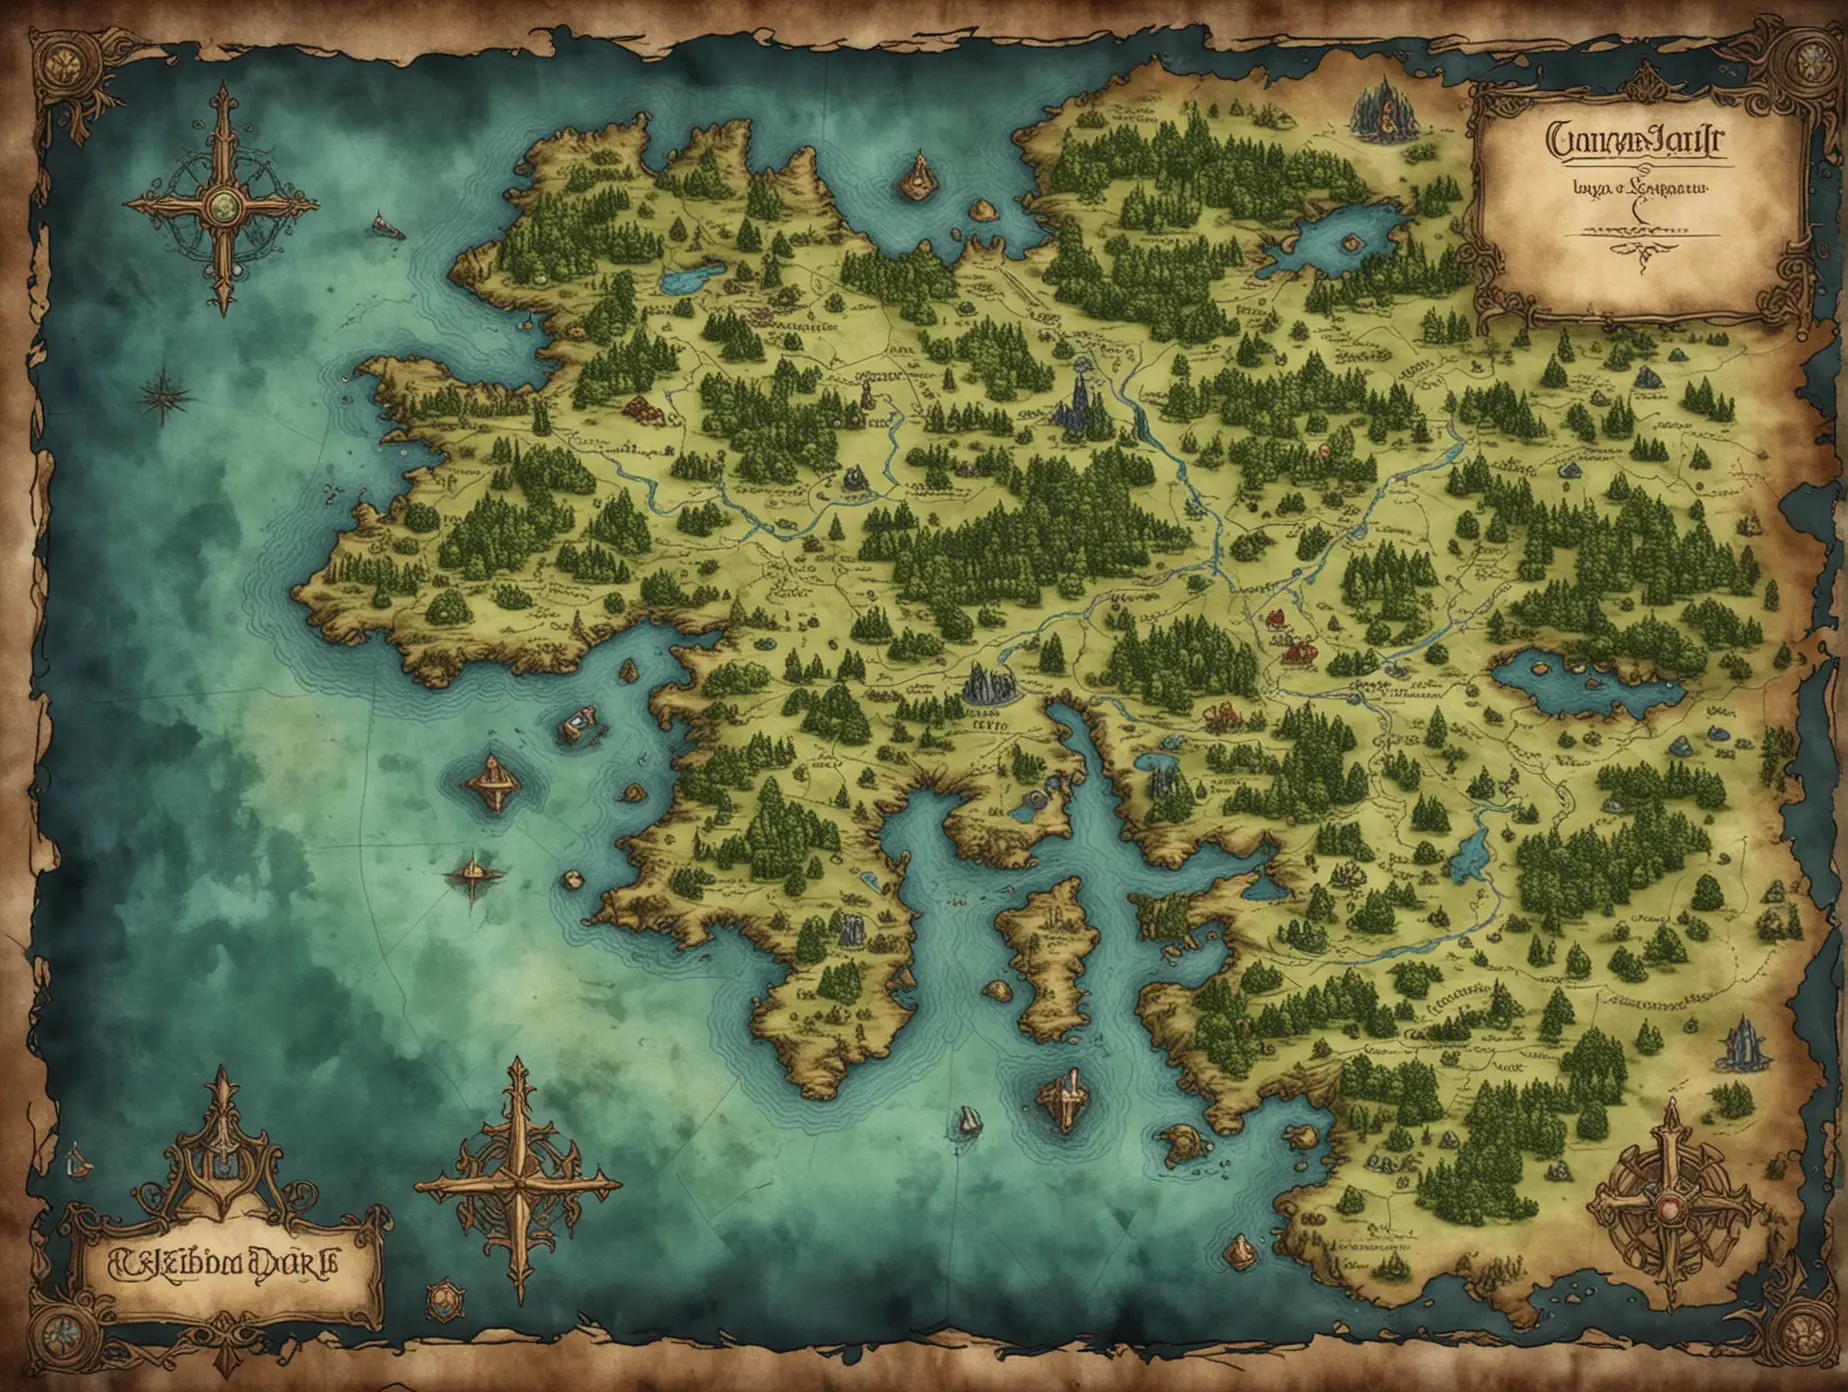 Enchanted Medieval Fantasy Continent Map in Greens and Blues